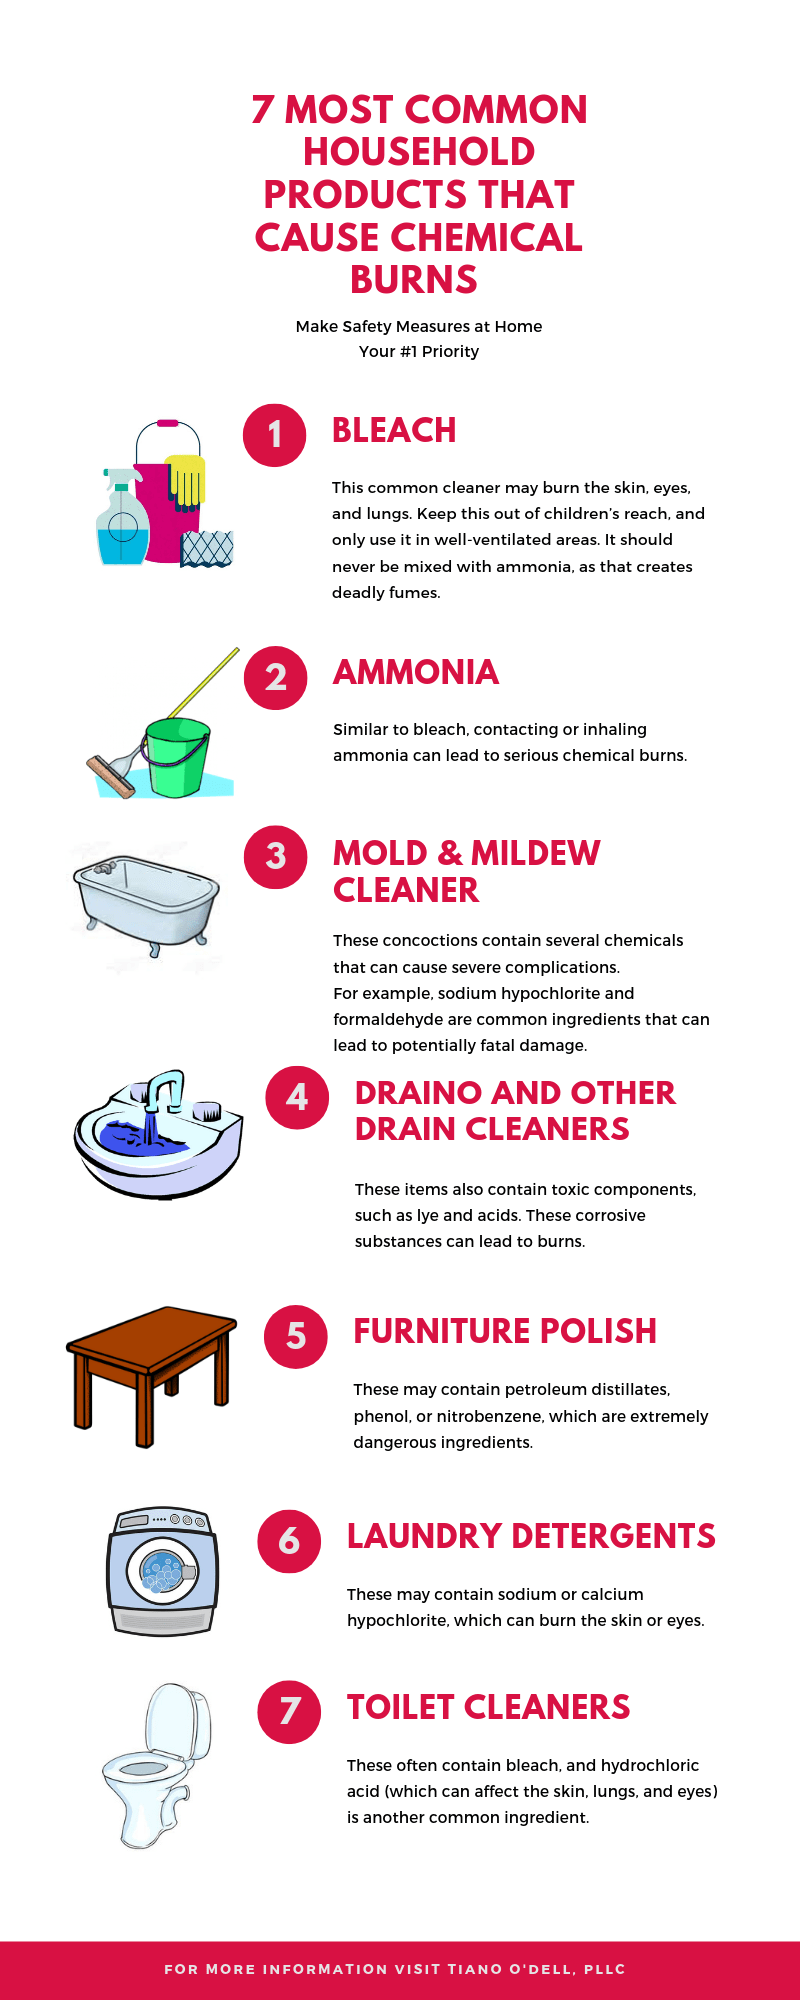 https://www.westvirginiapersonalinjurylawyer.net/wp-content/uploads/2016/07/7-Most-Common-Household-Products-That-Cause-Chemical-Burns.png